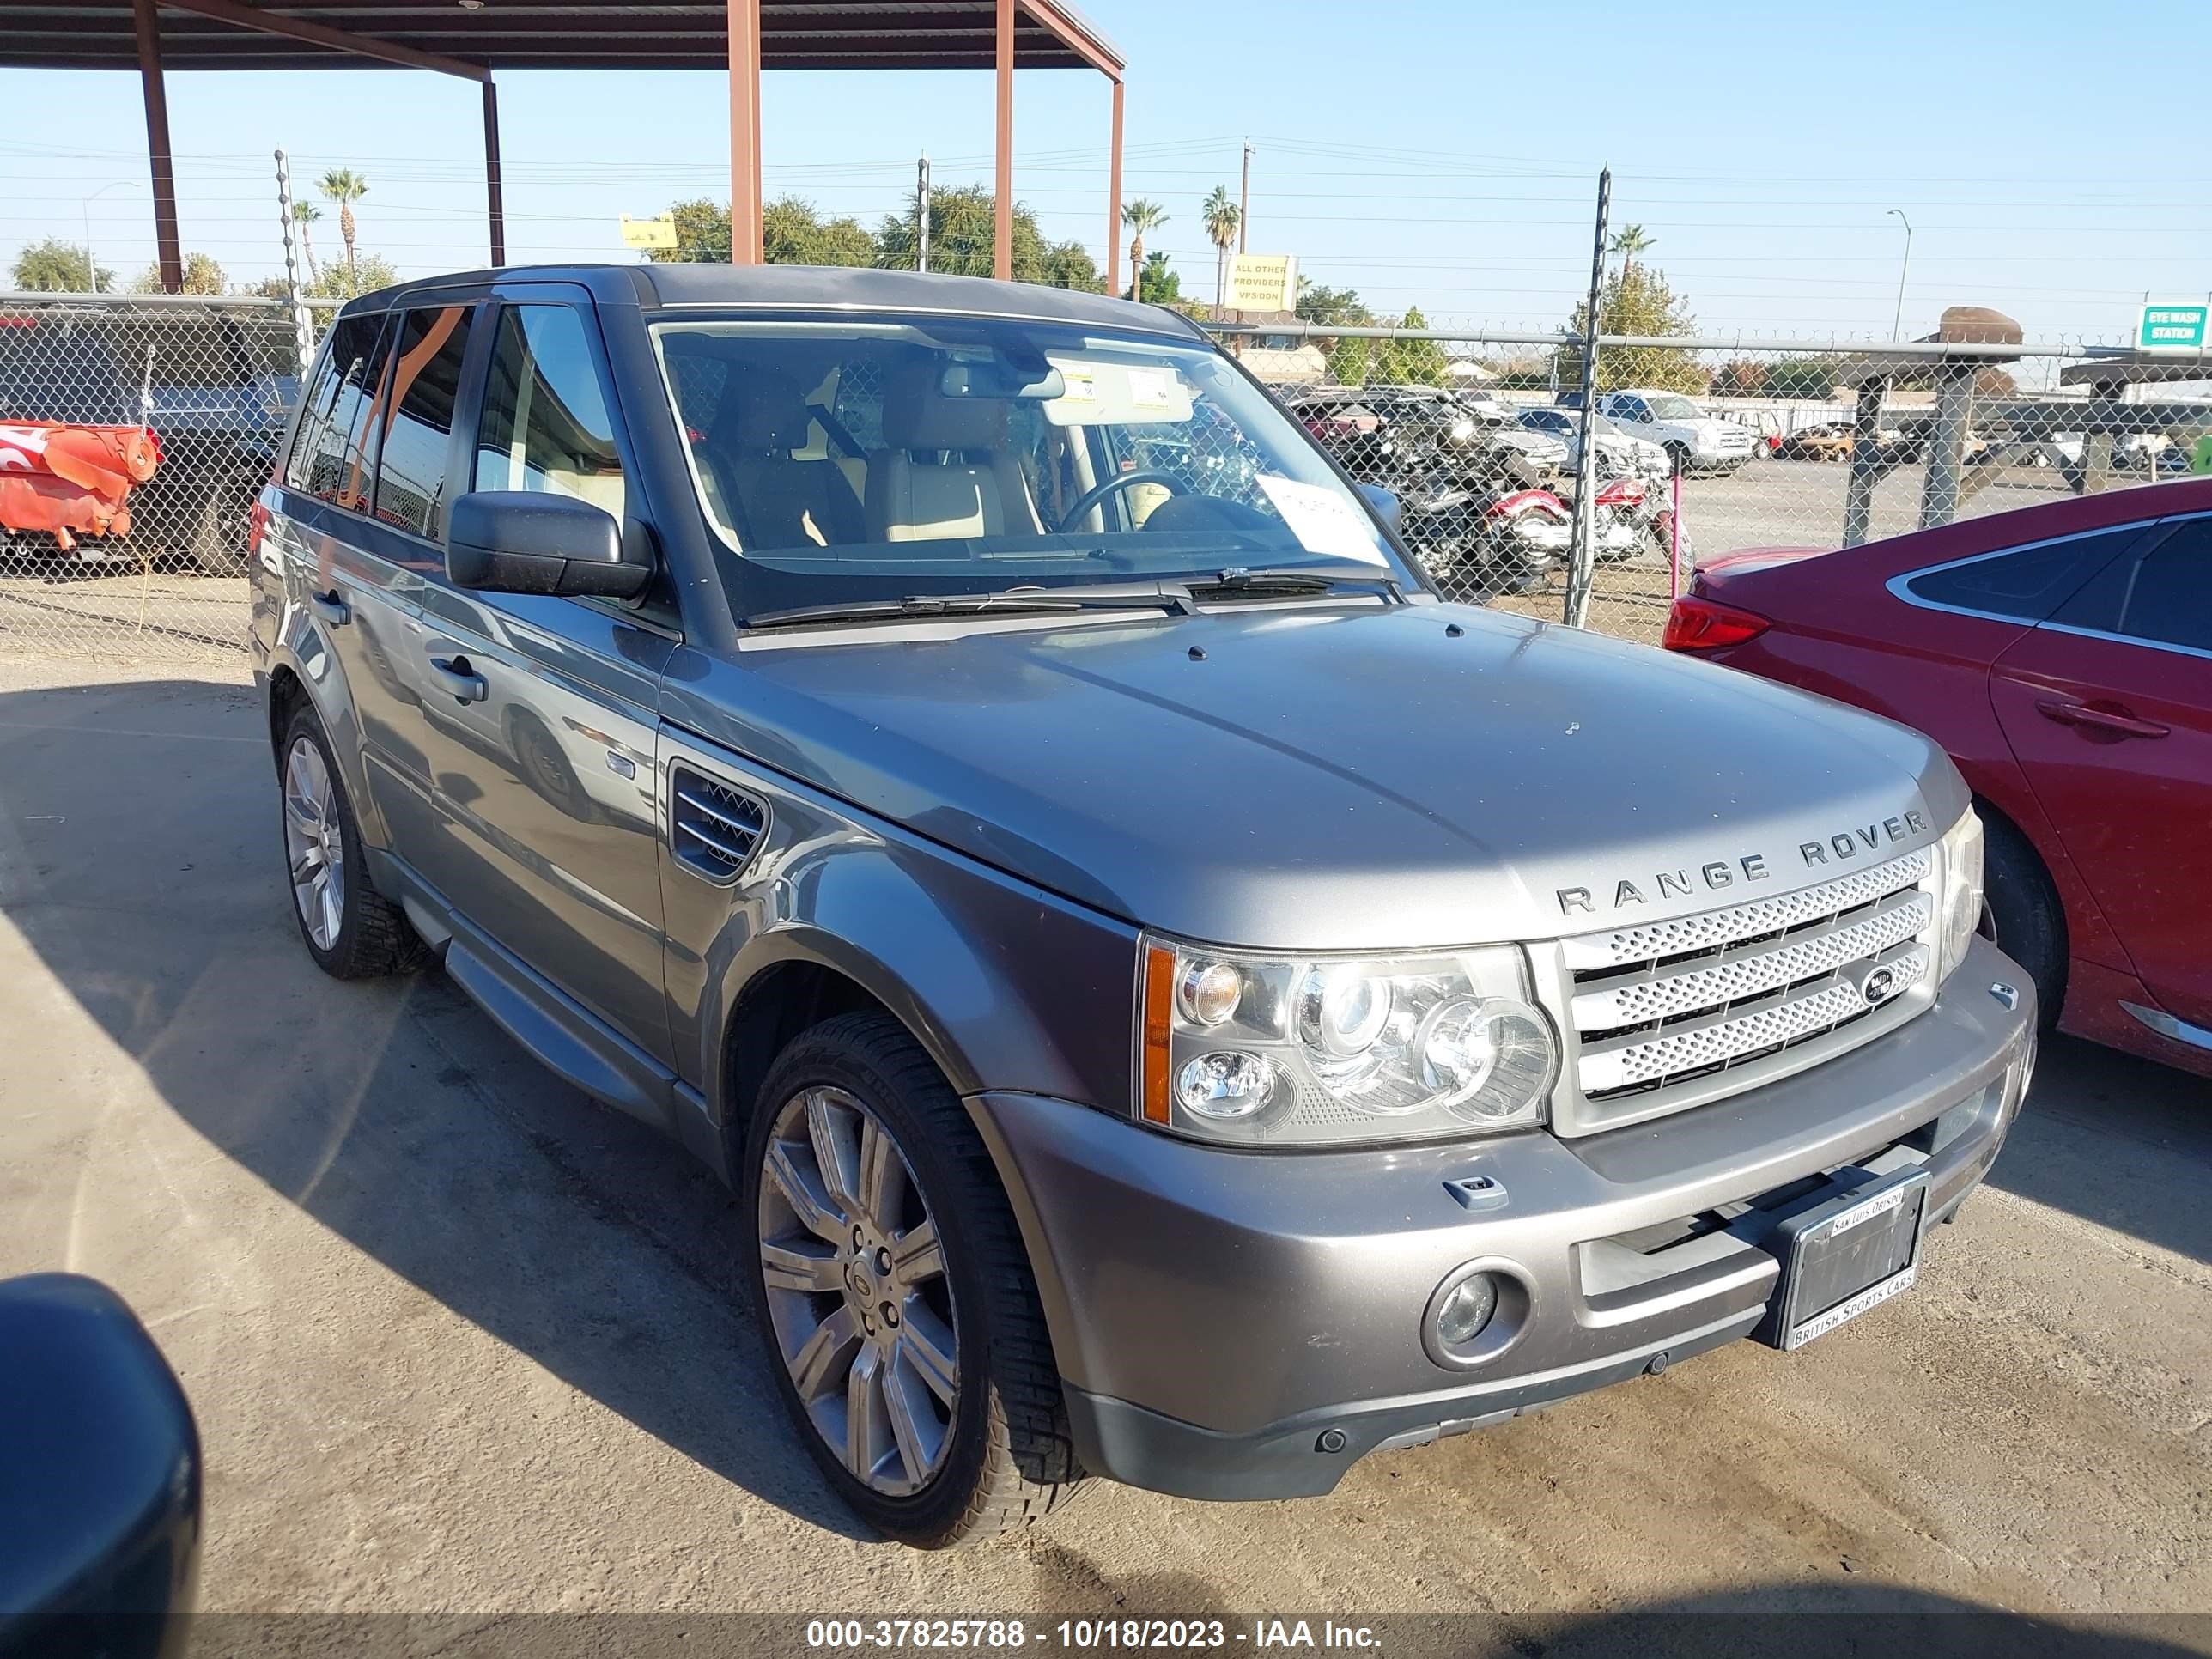 vin: SALSH23489A177018 SALSH23489A177018 2009 land rover range rover sport 4200 for Sale in 93705, 1805 N Lafayette Ave, Fresno, California, USA